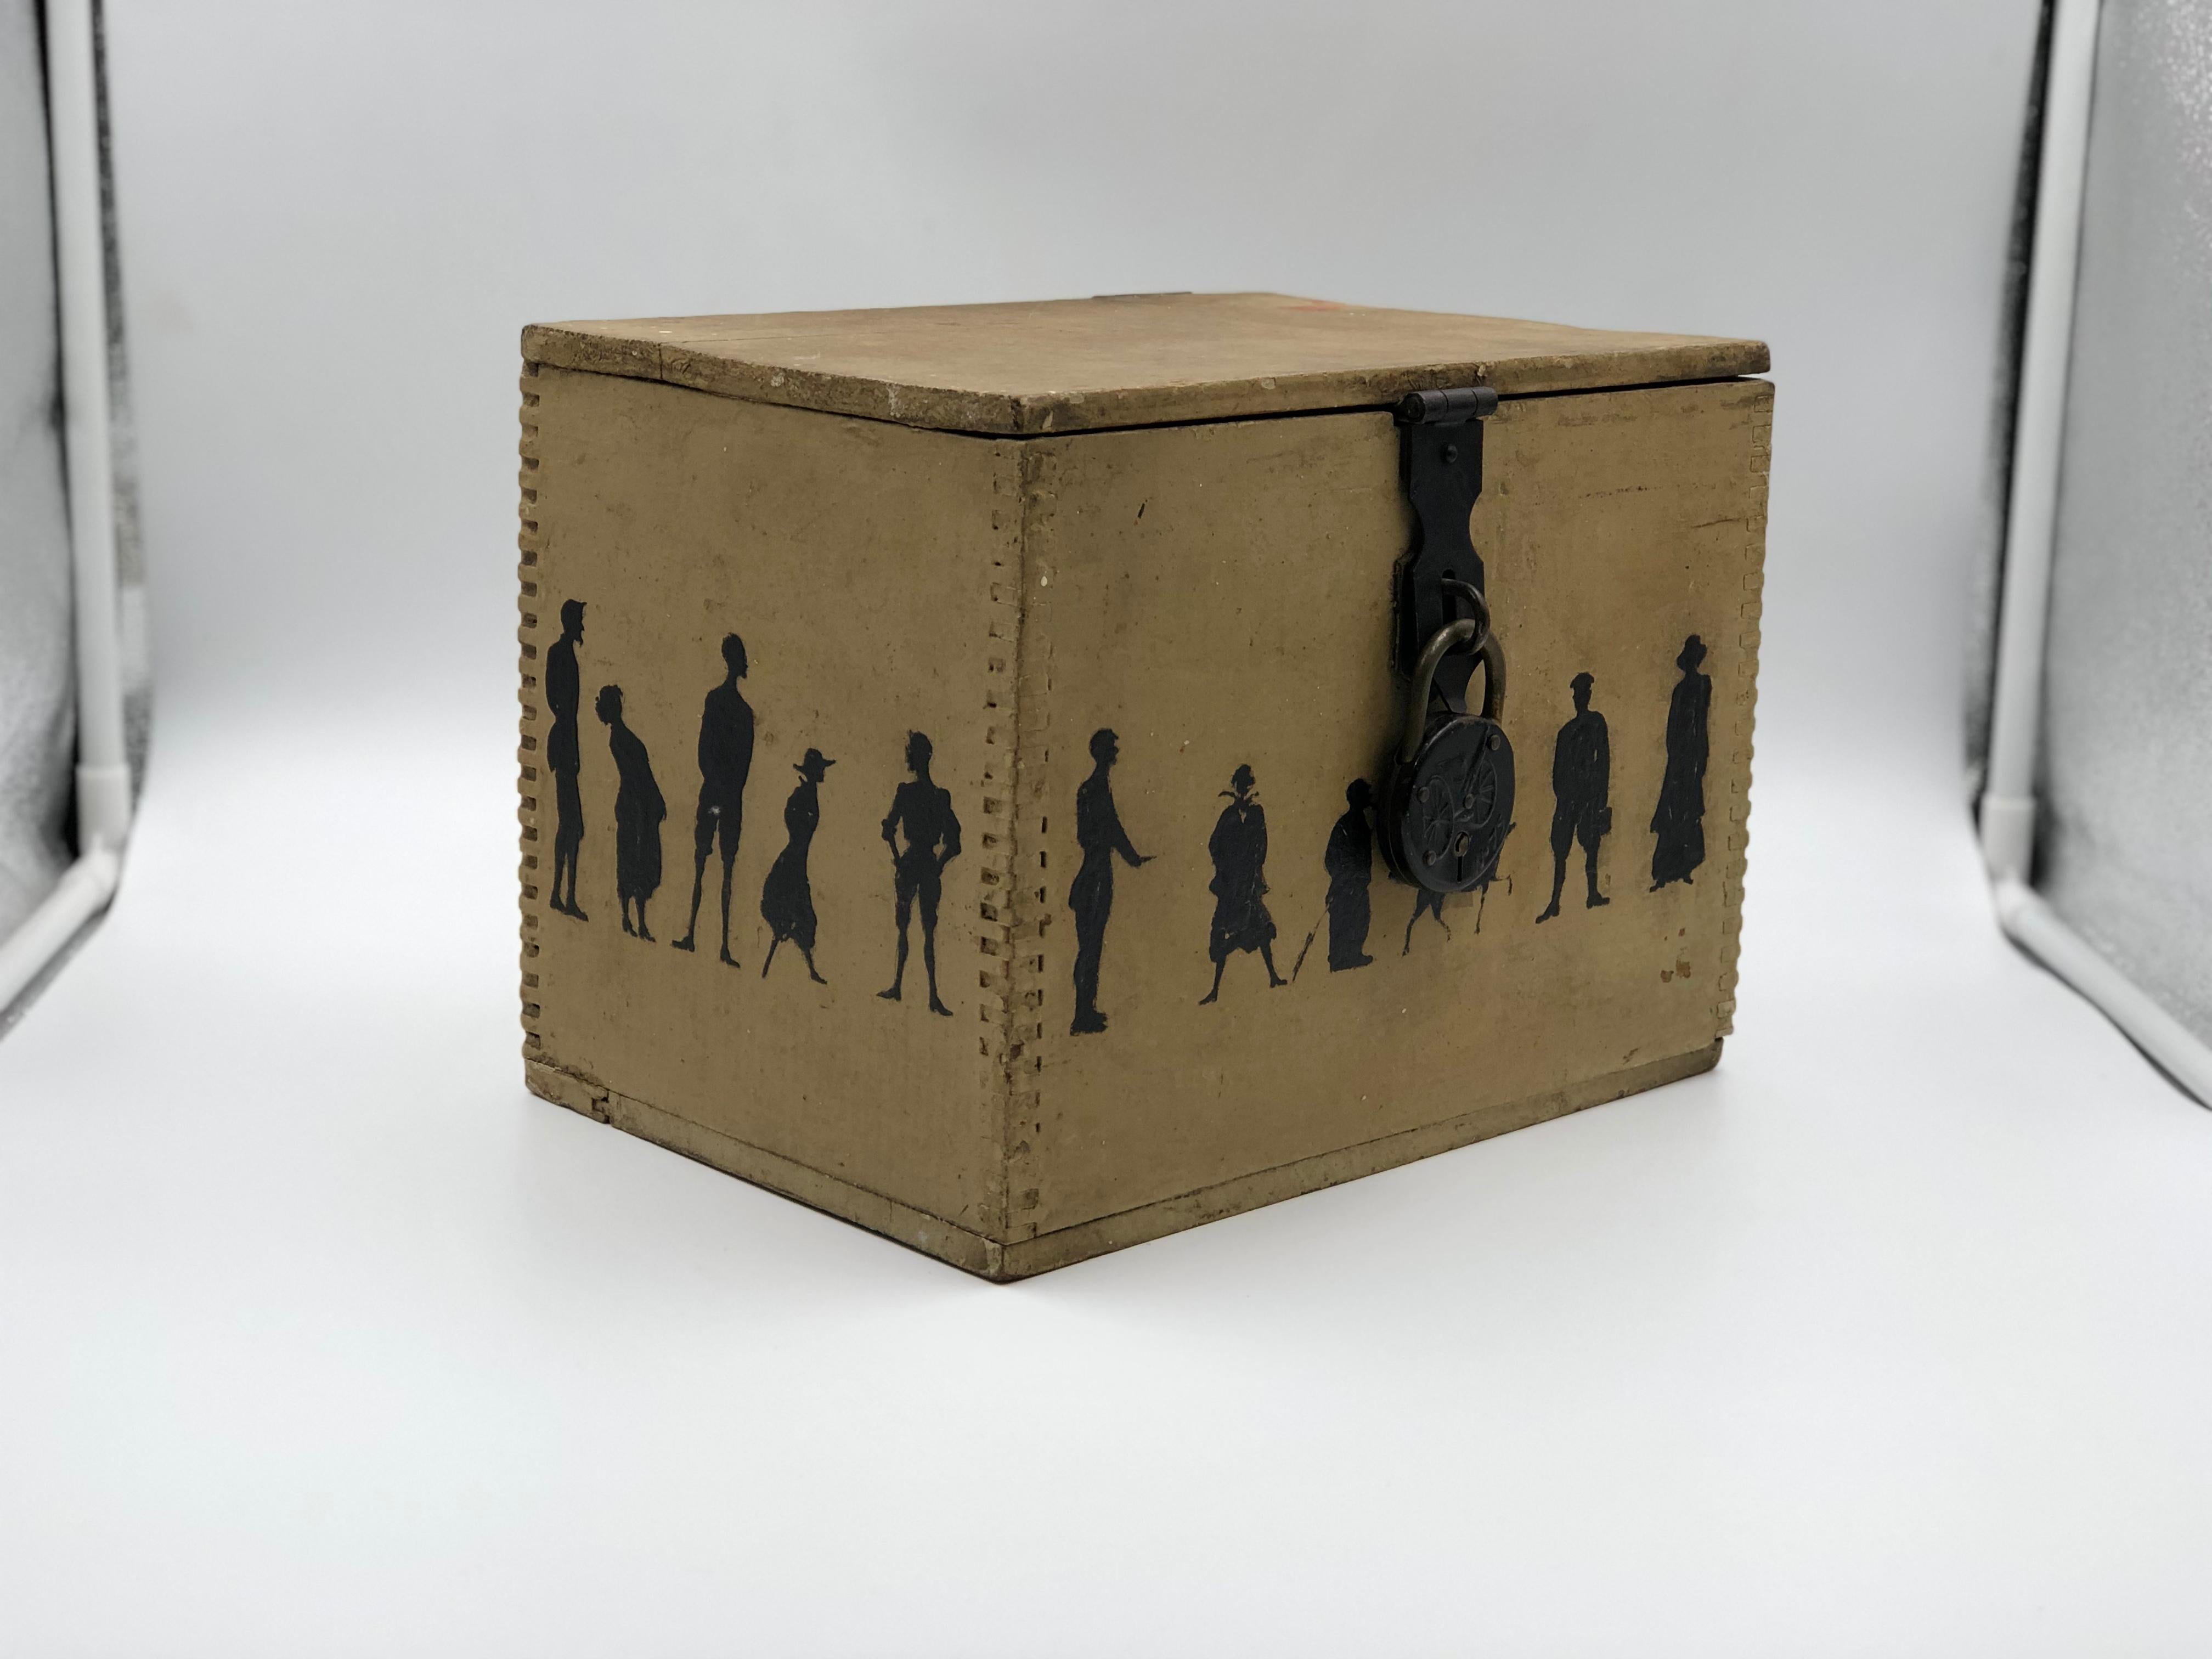 Hand-Painted 19th Century Silhouette Painted Wooden Box